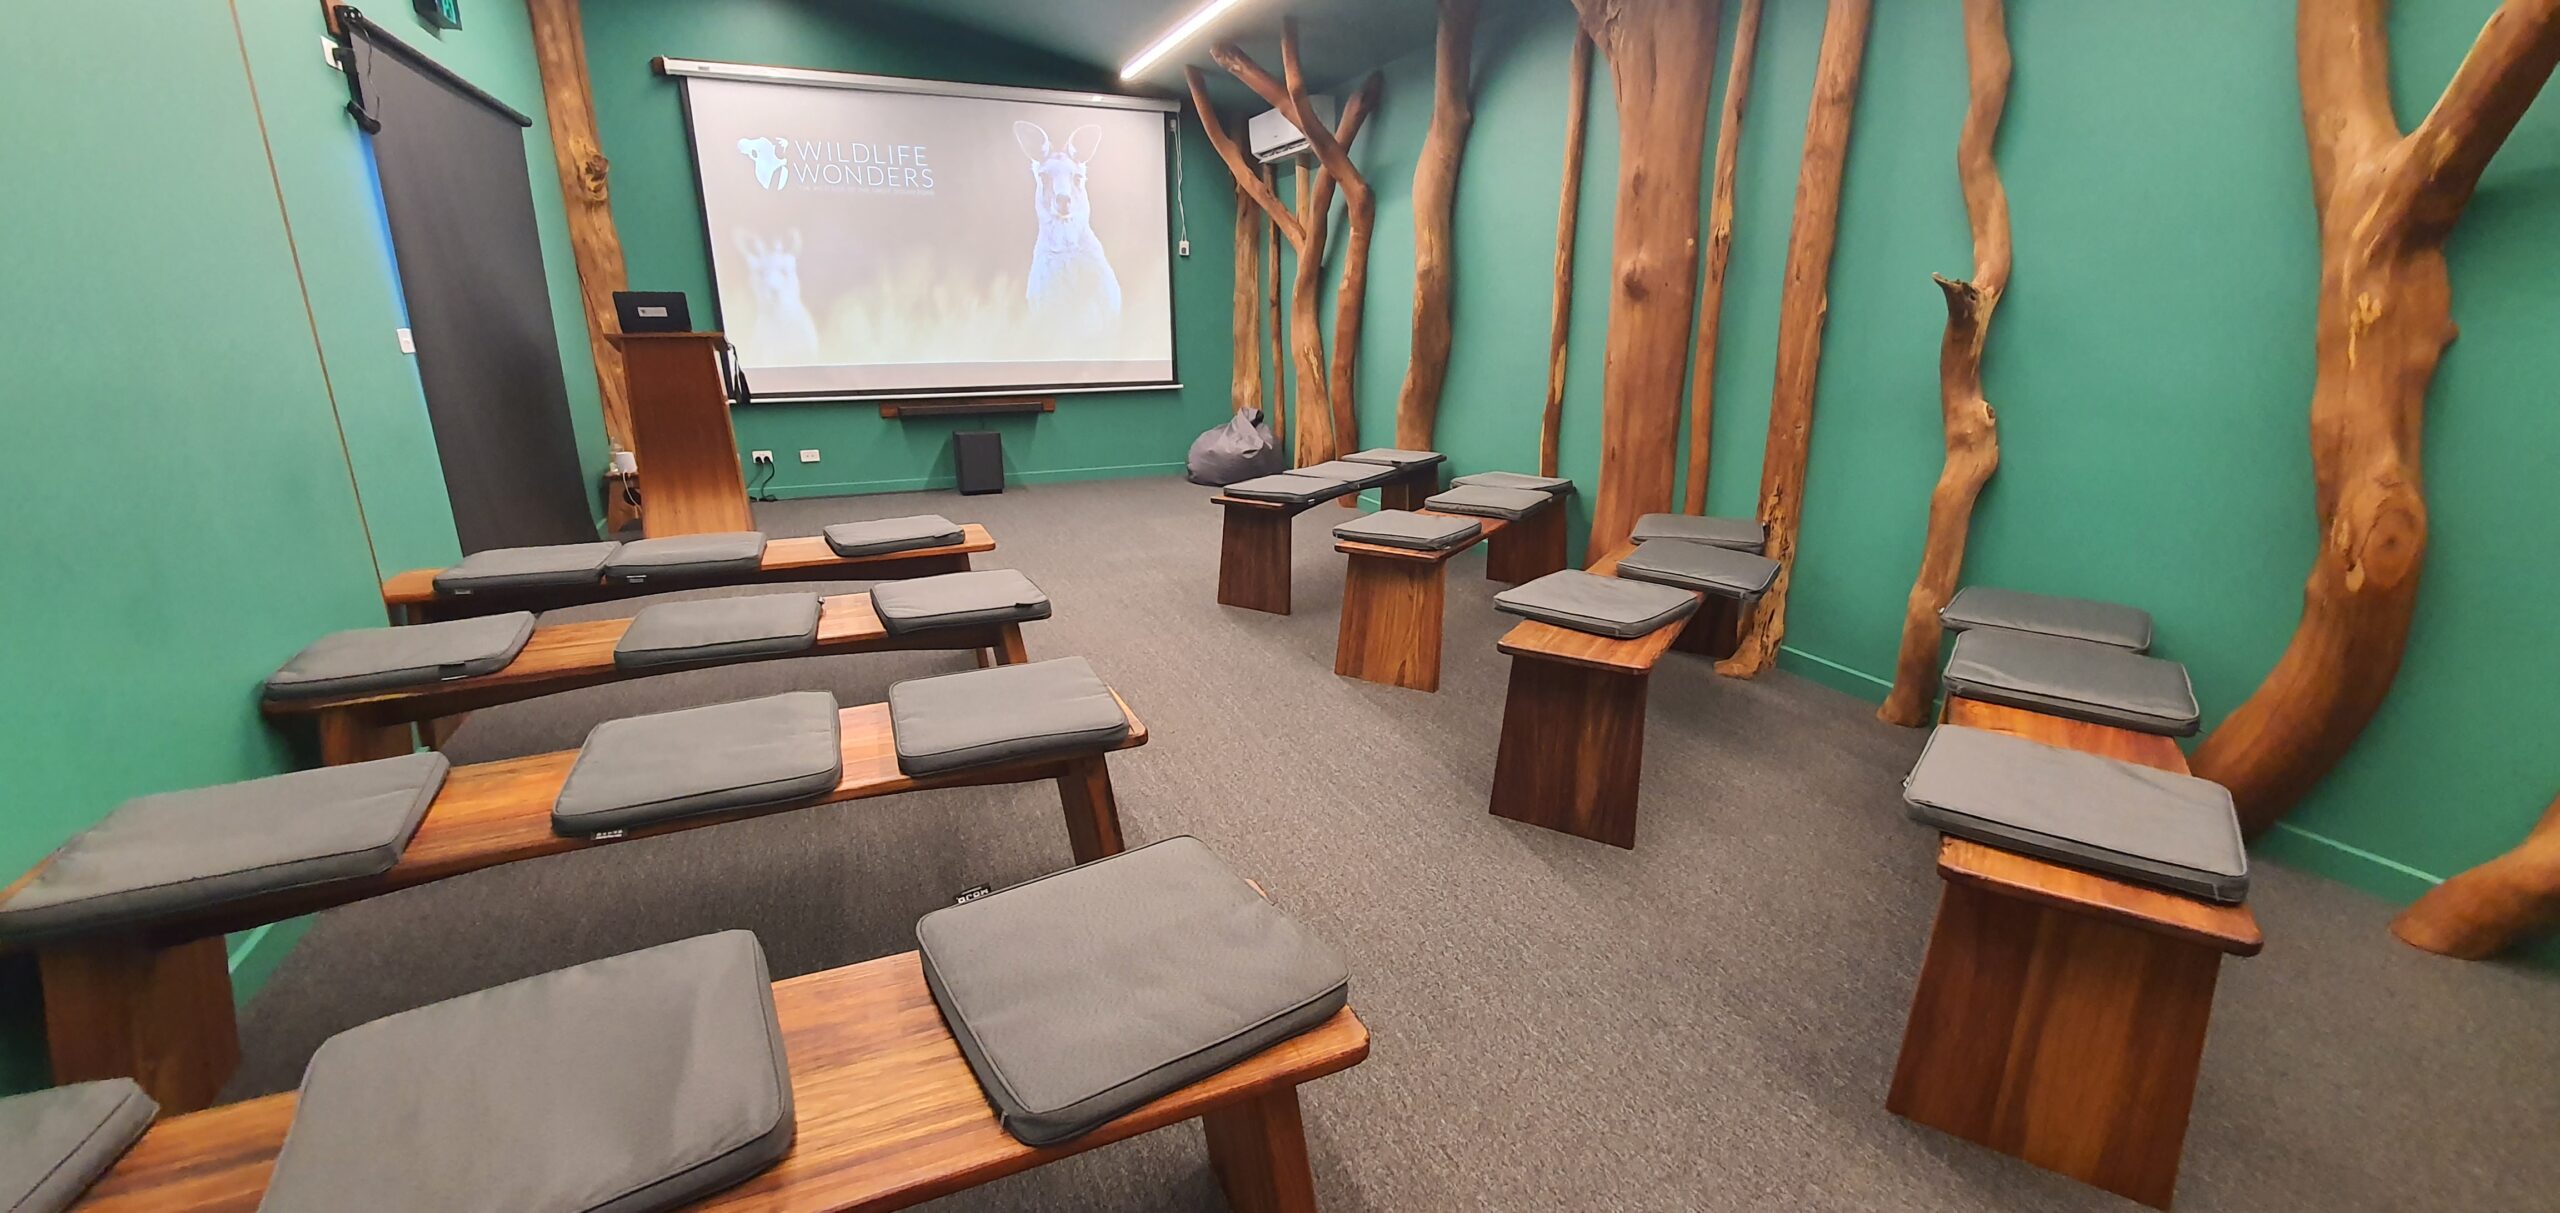 The green theatre room with wooden shared bench seating in a row, a projector screen at the front of the room playing a video